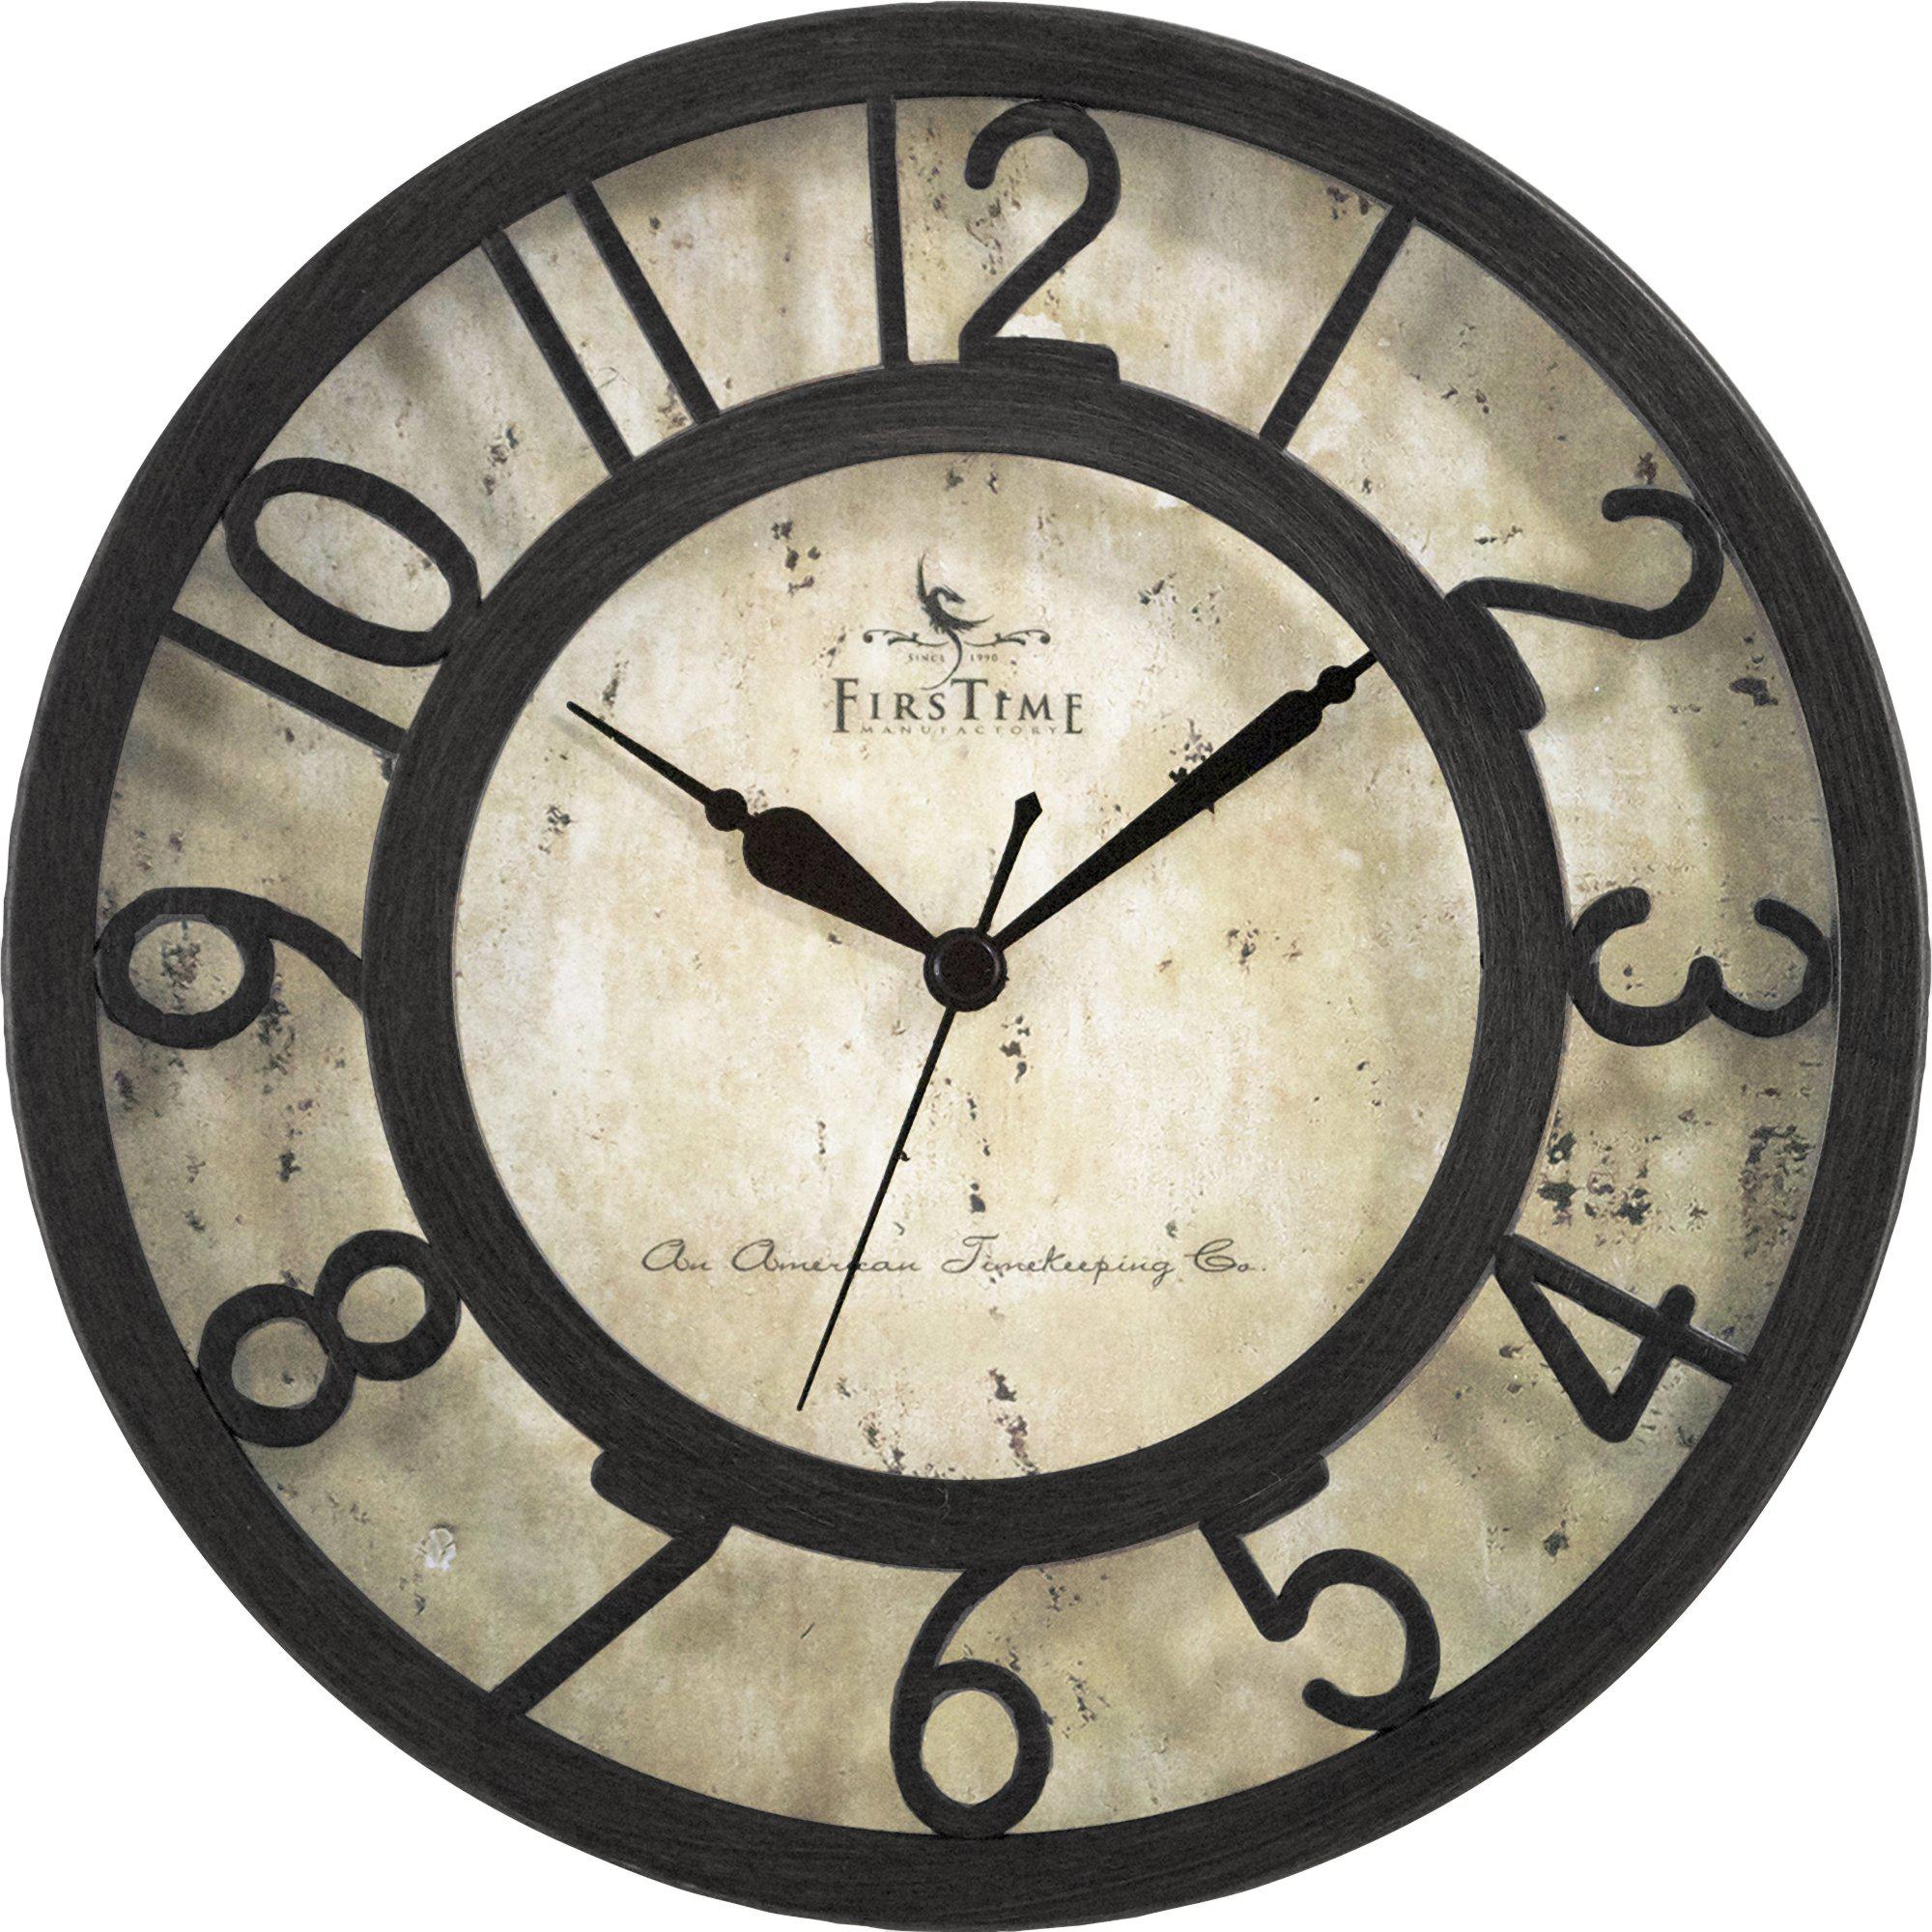 firstime & co. raised number small wall clock, oil rubbed bronze, 8 x 2 x 8 inches